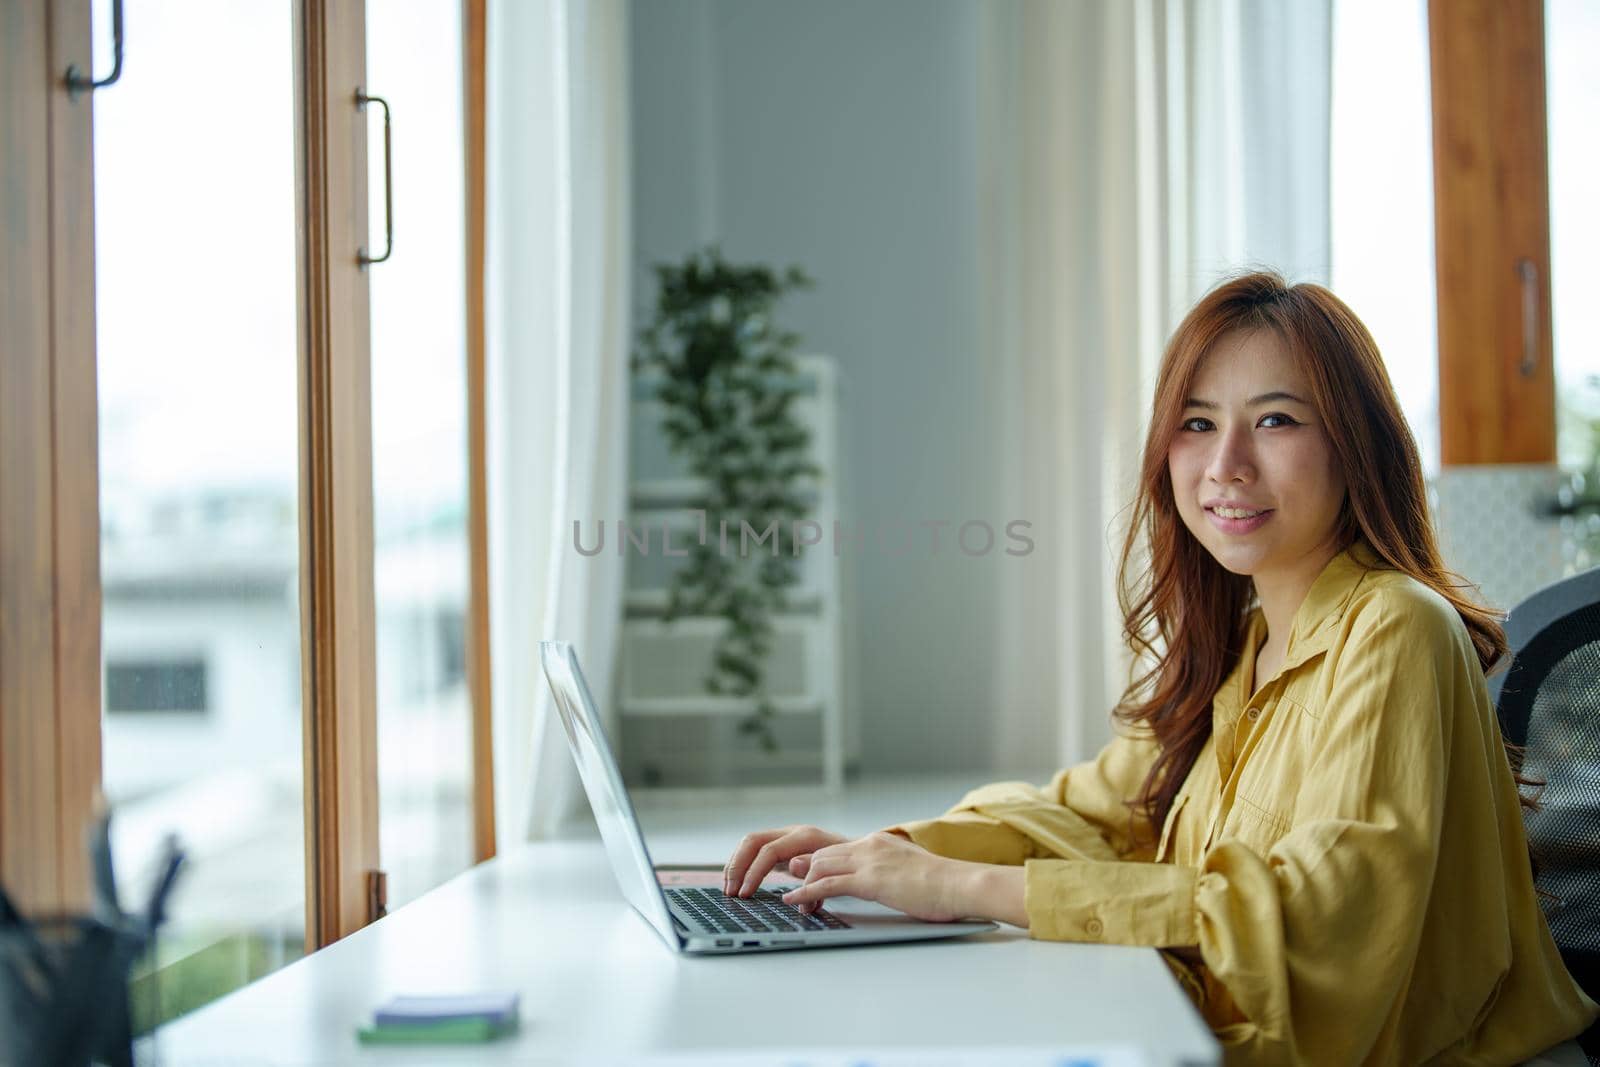 Portrait of a business woman, accountant, marketer, showing a smiling face during the start of a new morning before working.